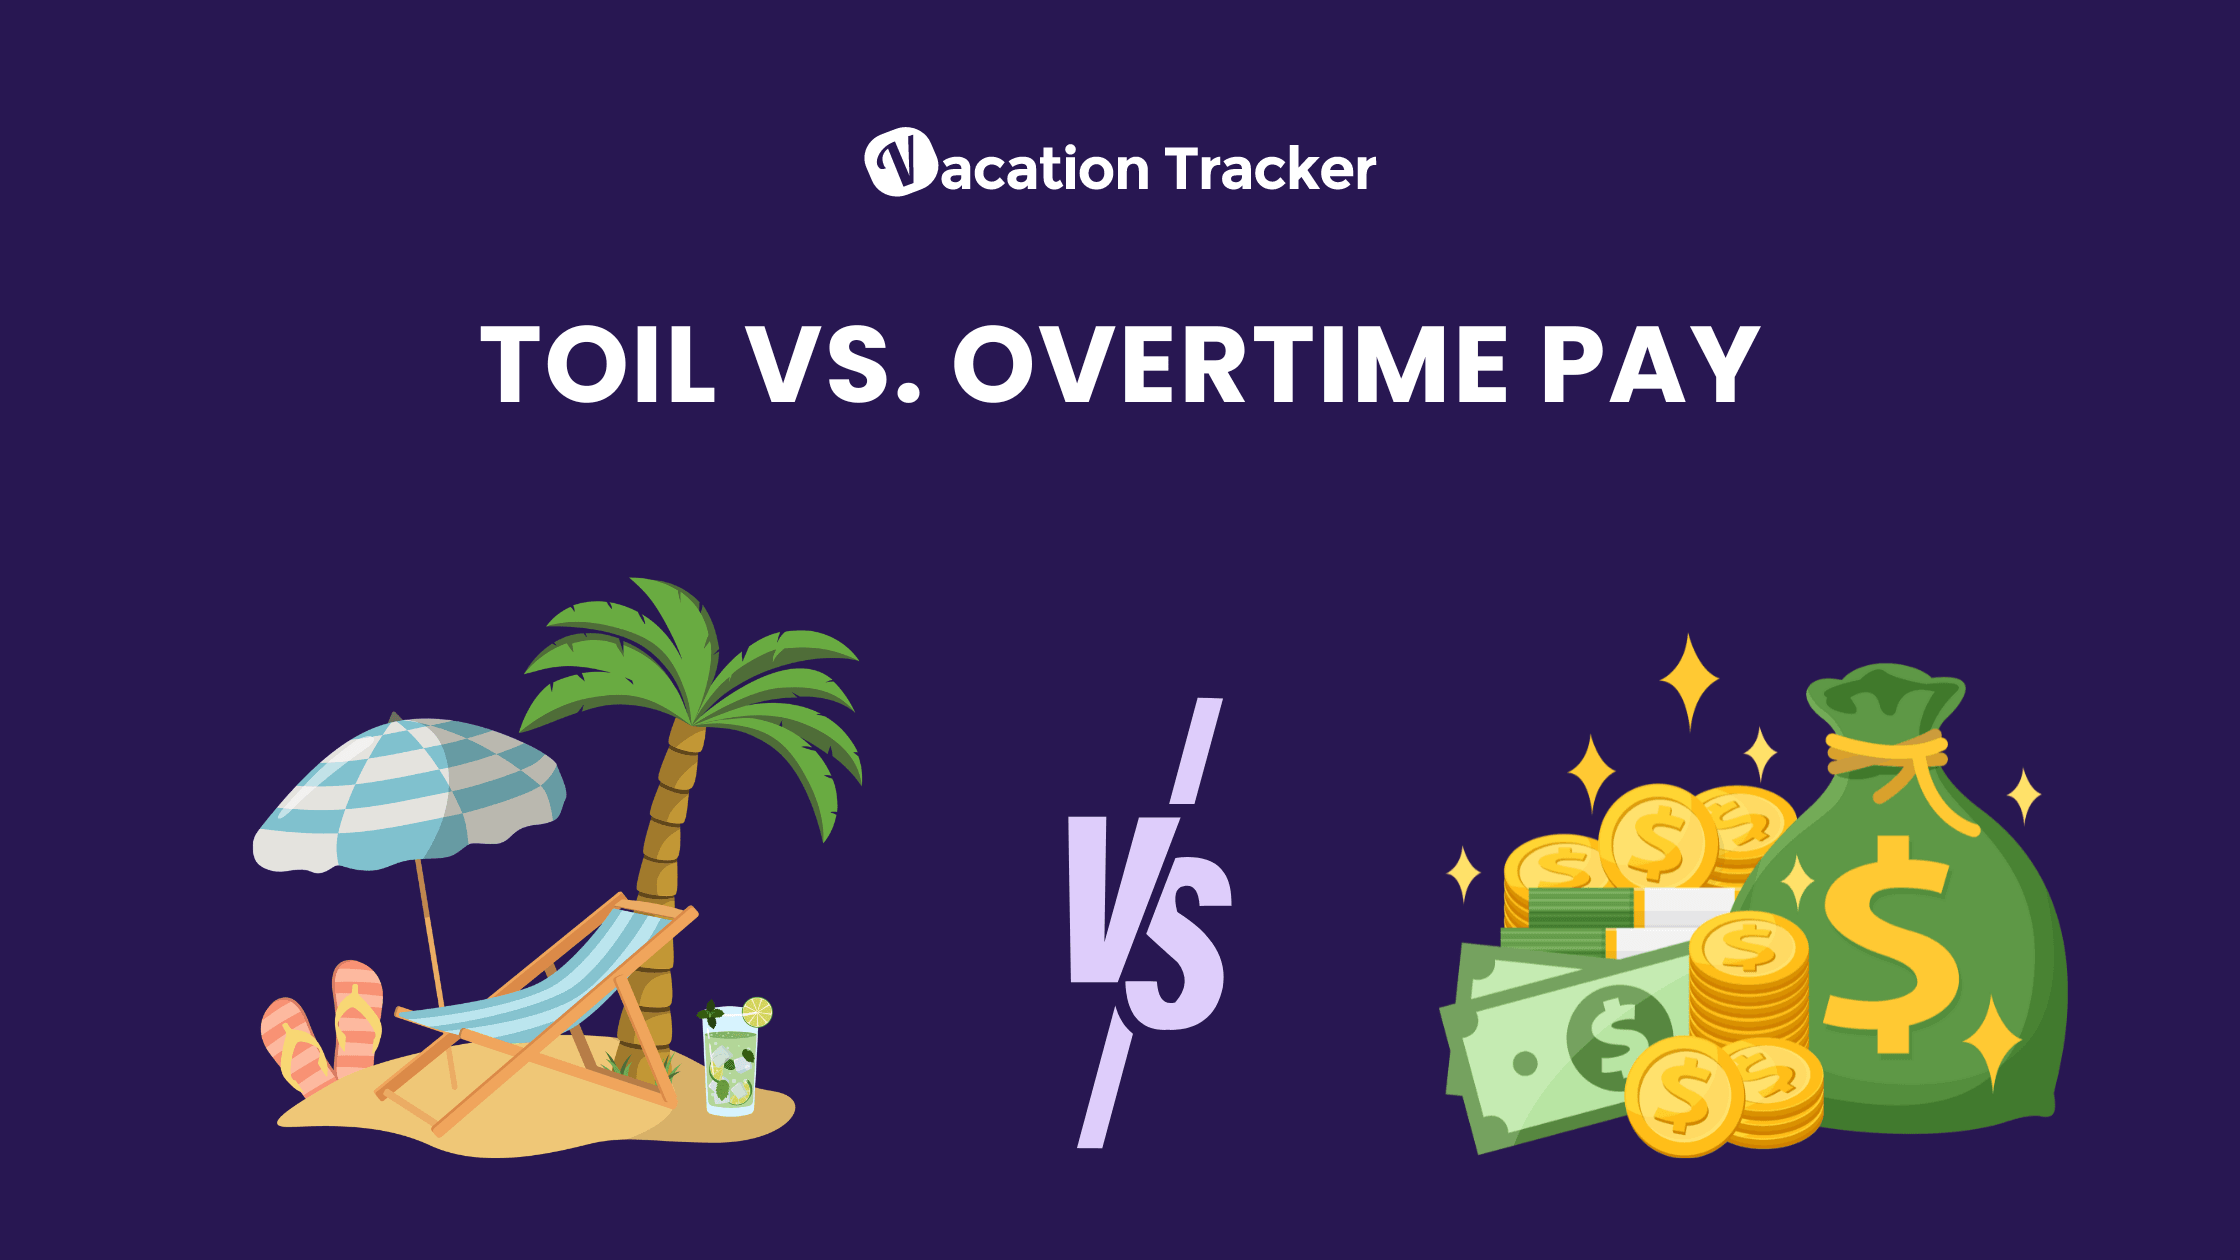 TOIL vs. Overtime Pay: What’s Best for Your Business?